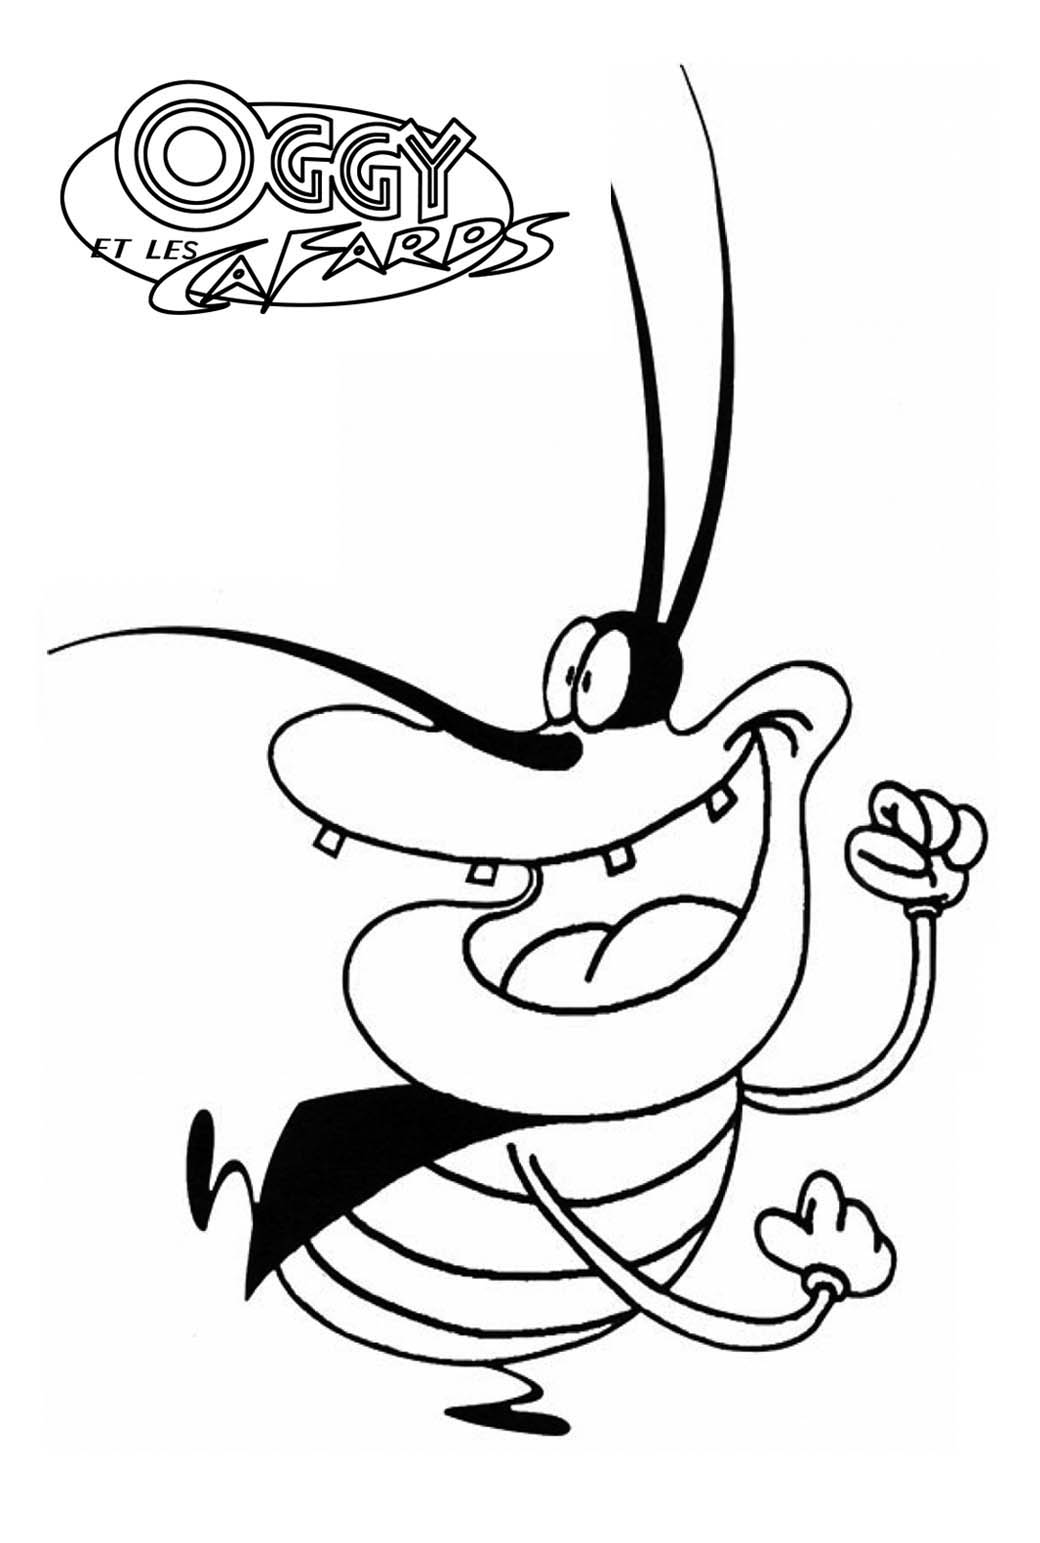 Coloring page: Oggy and the Cockroaches (Cartoons) #37875 - Free Printable Coloring Pages